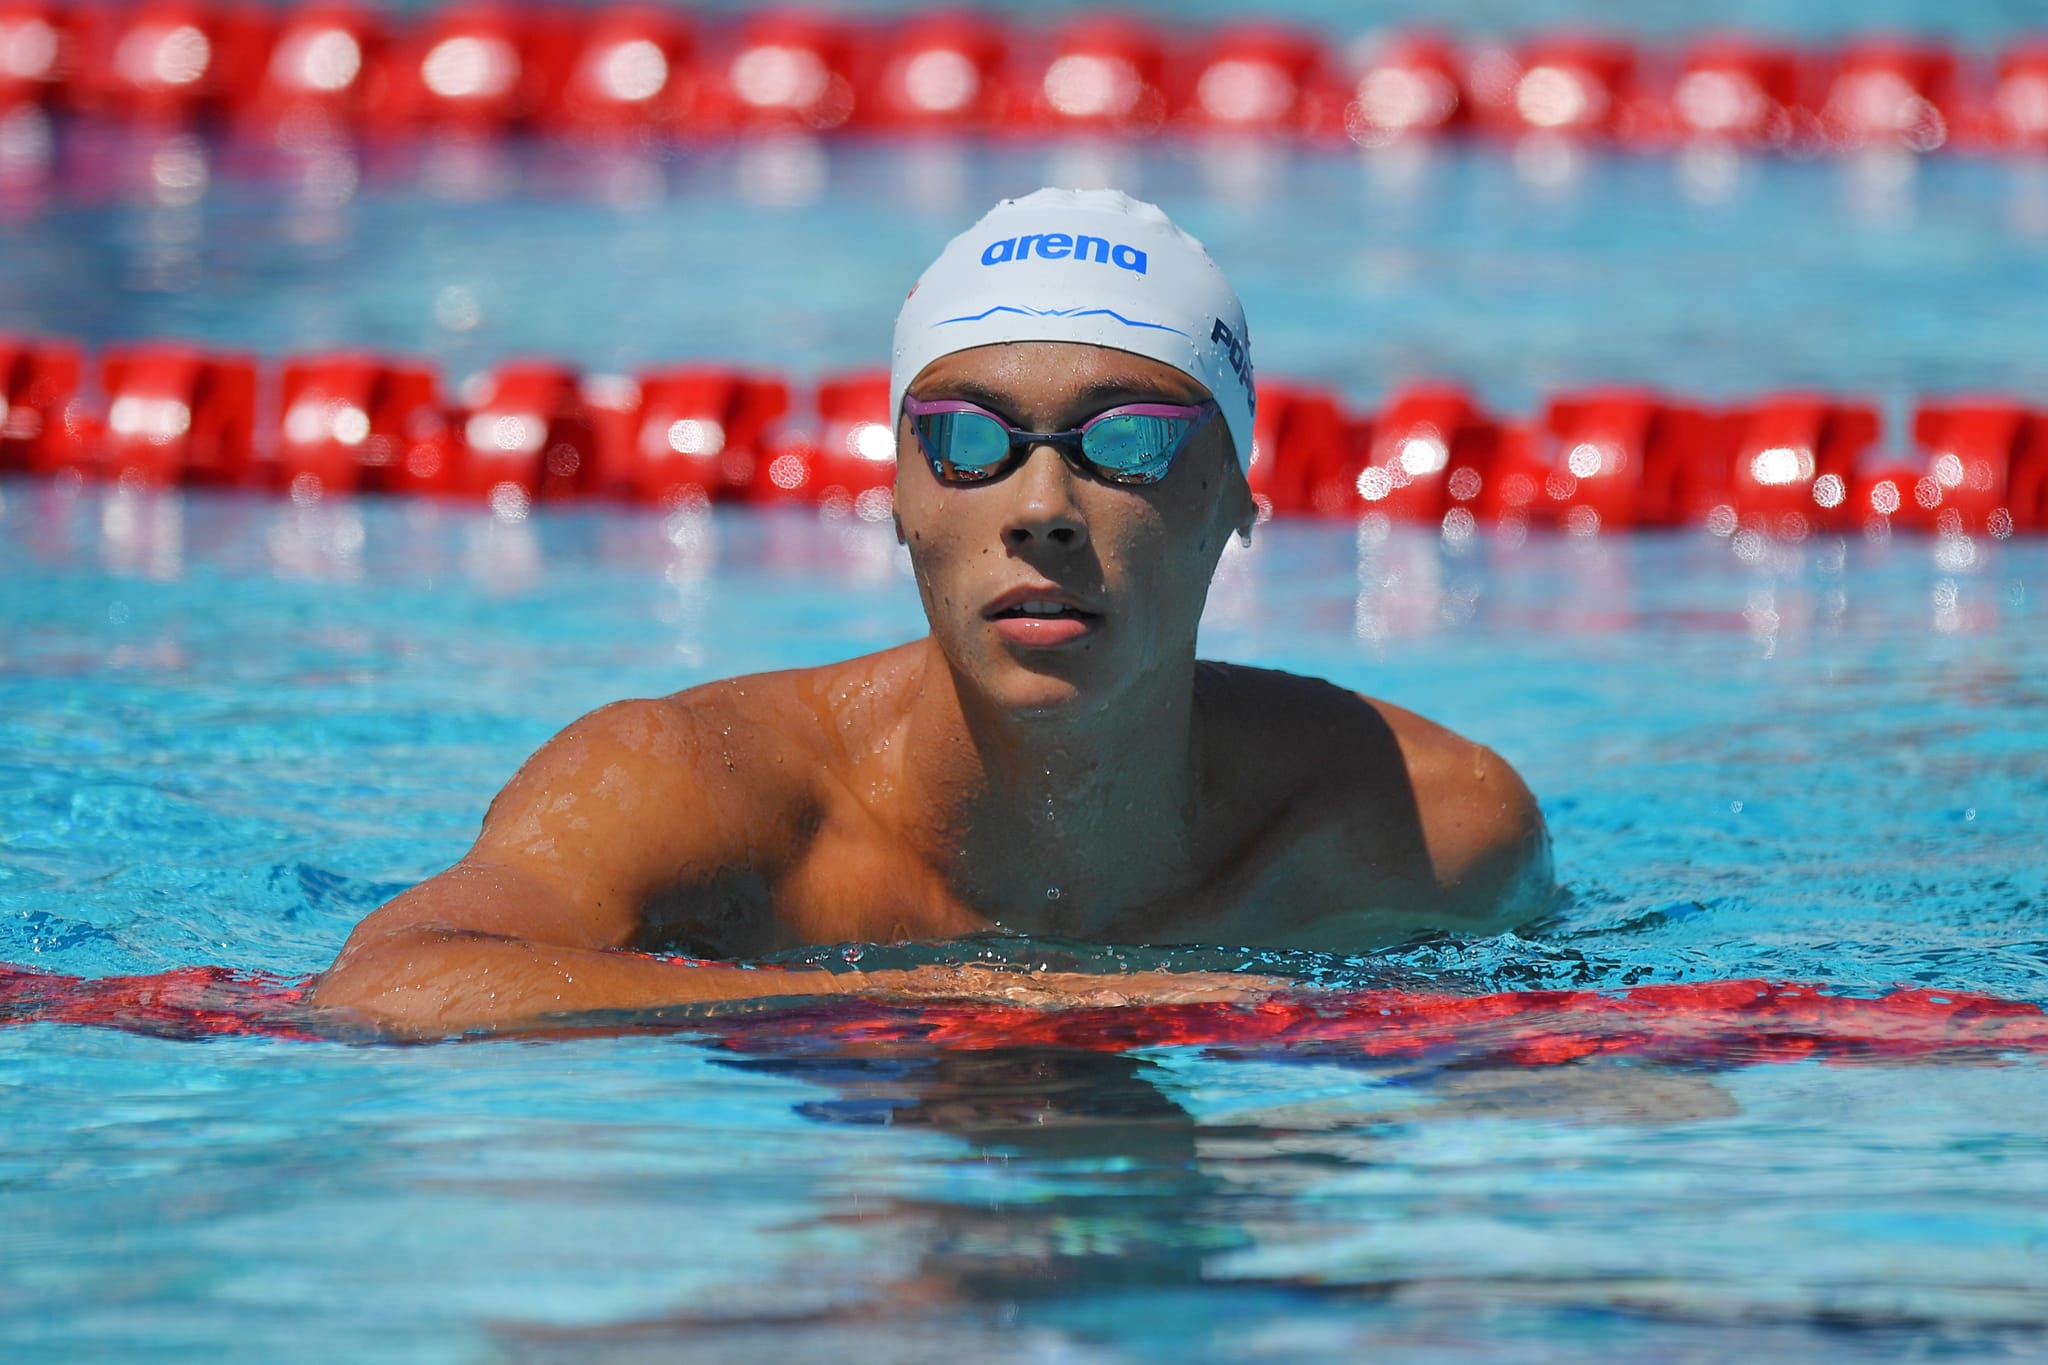 Romanian swimmer David Popovici wins two gold medals at competition in Luxembourg